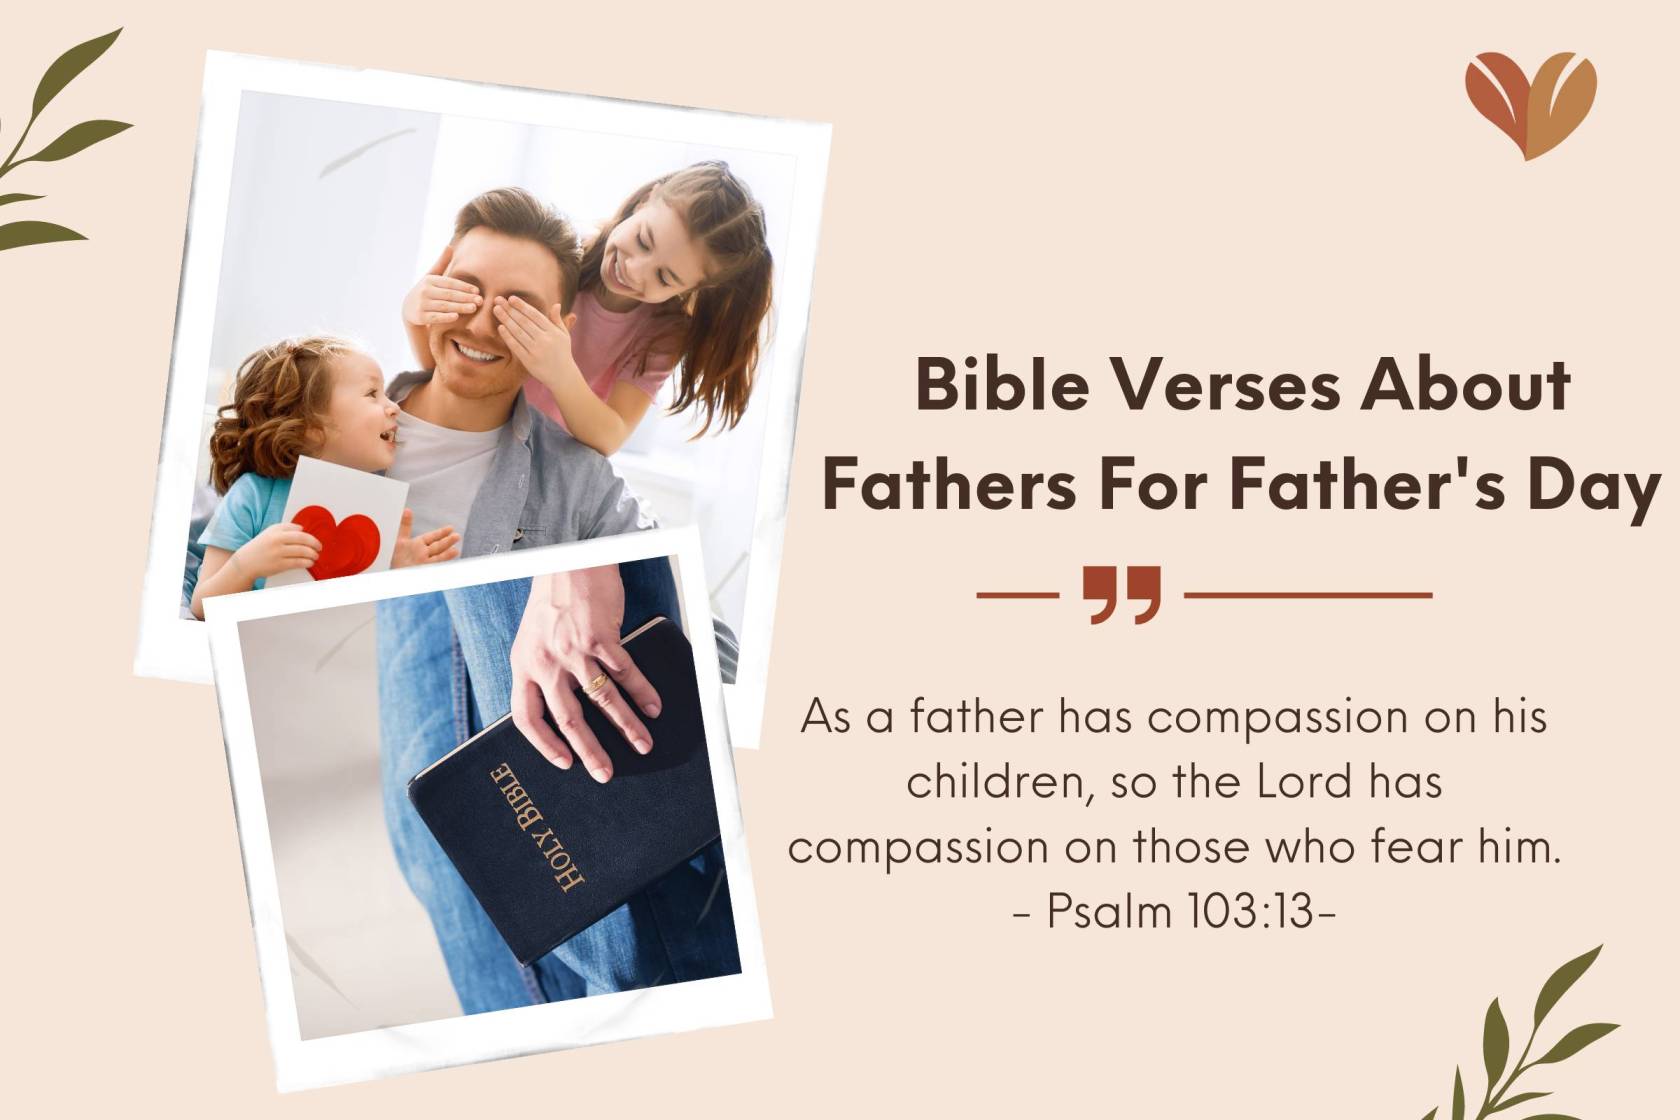 Inspiring Father's Day Christian Messages: Exploring Bible Verses About Fathers